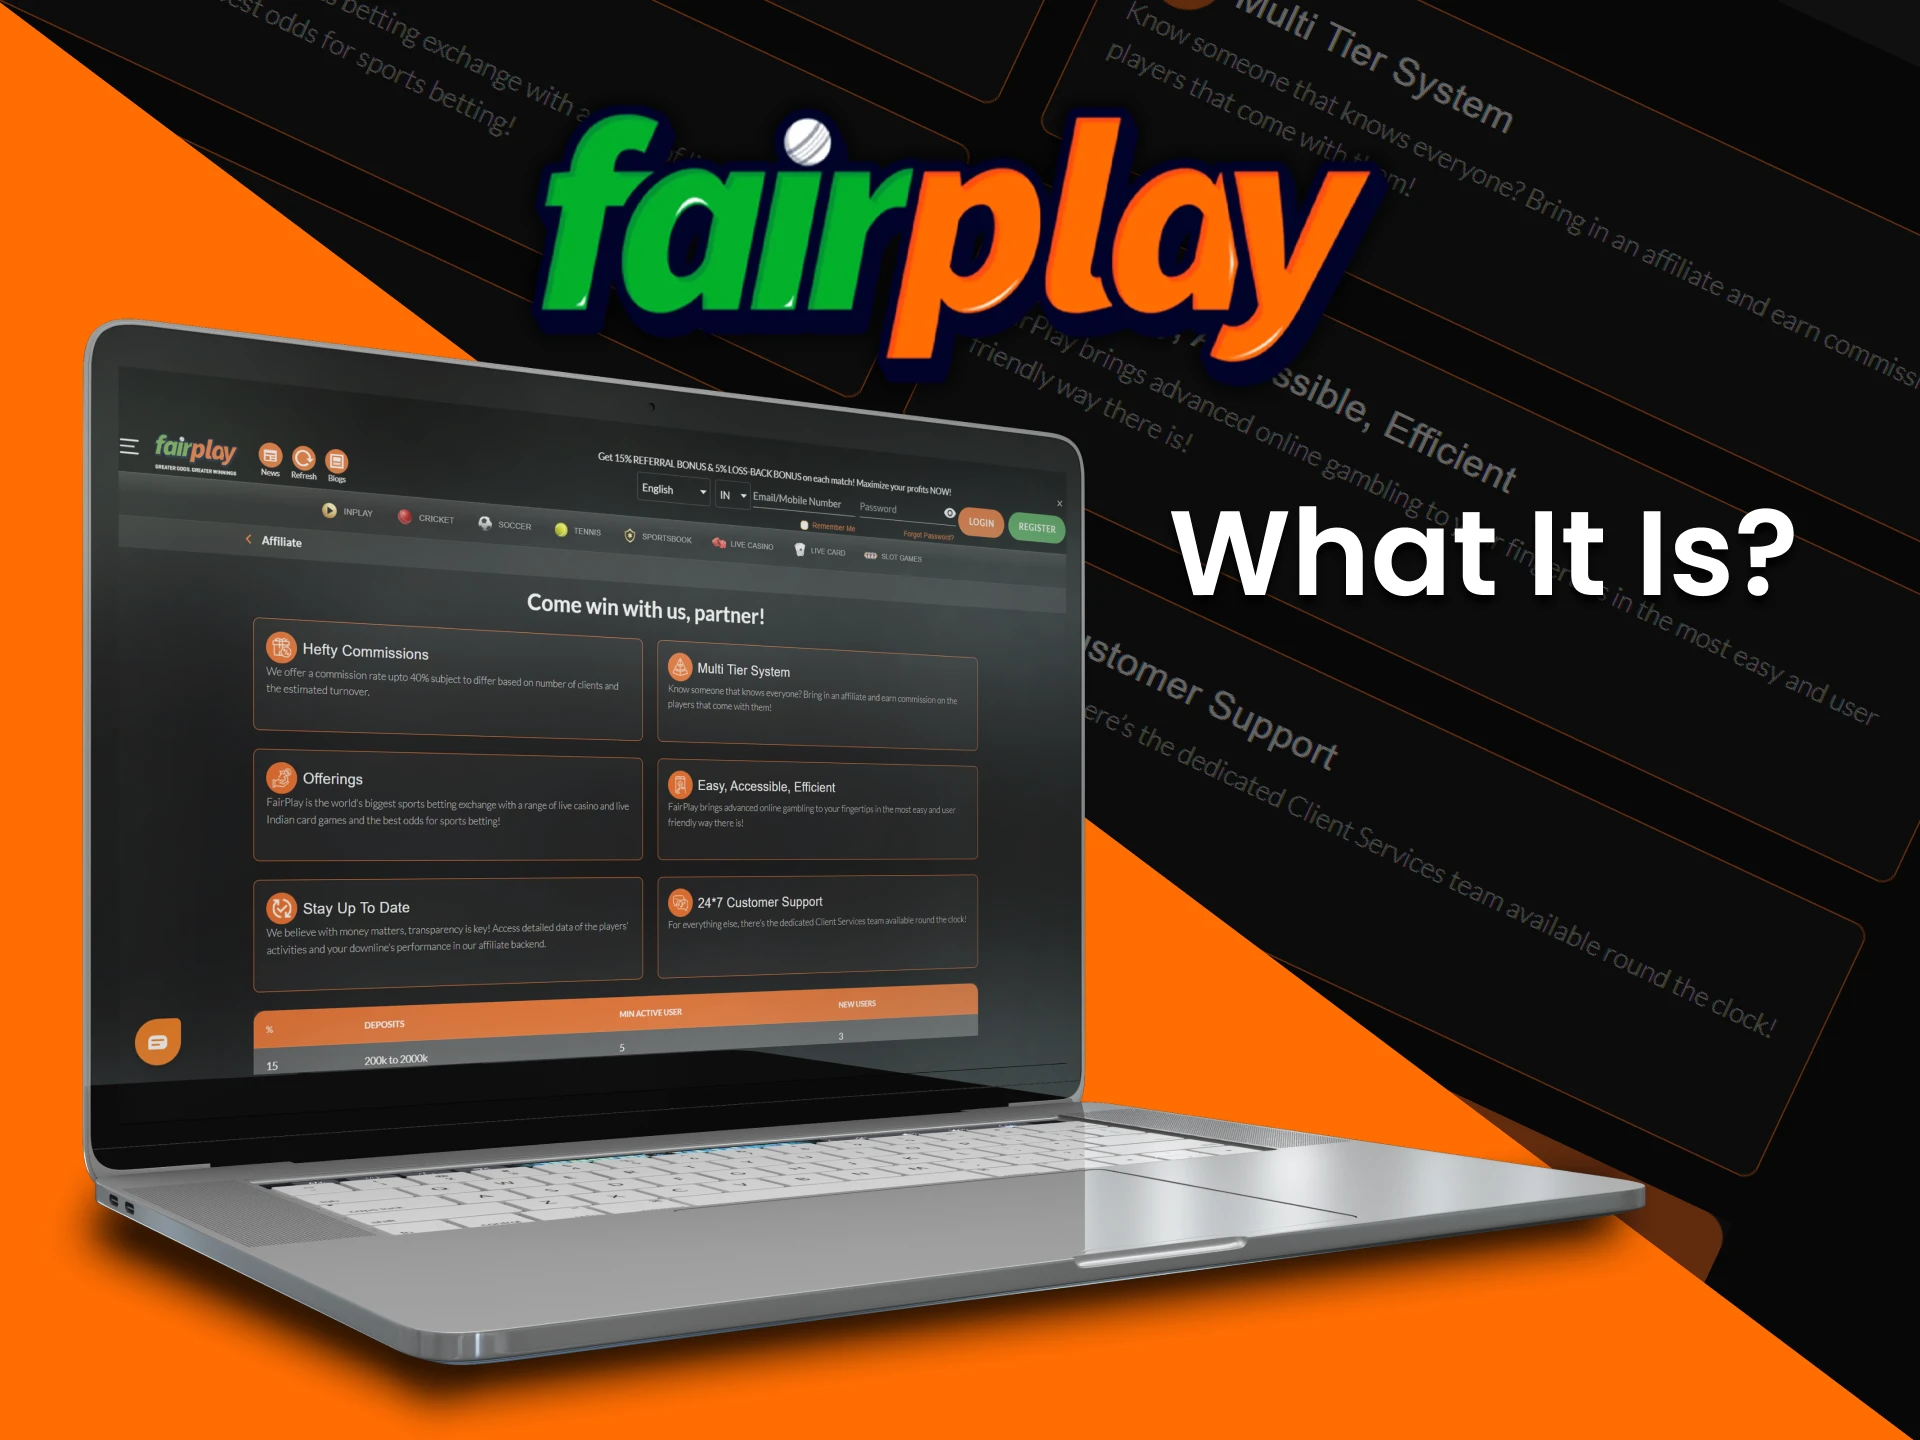 Fairplay affiliate program allows you to invite friends.